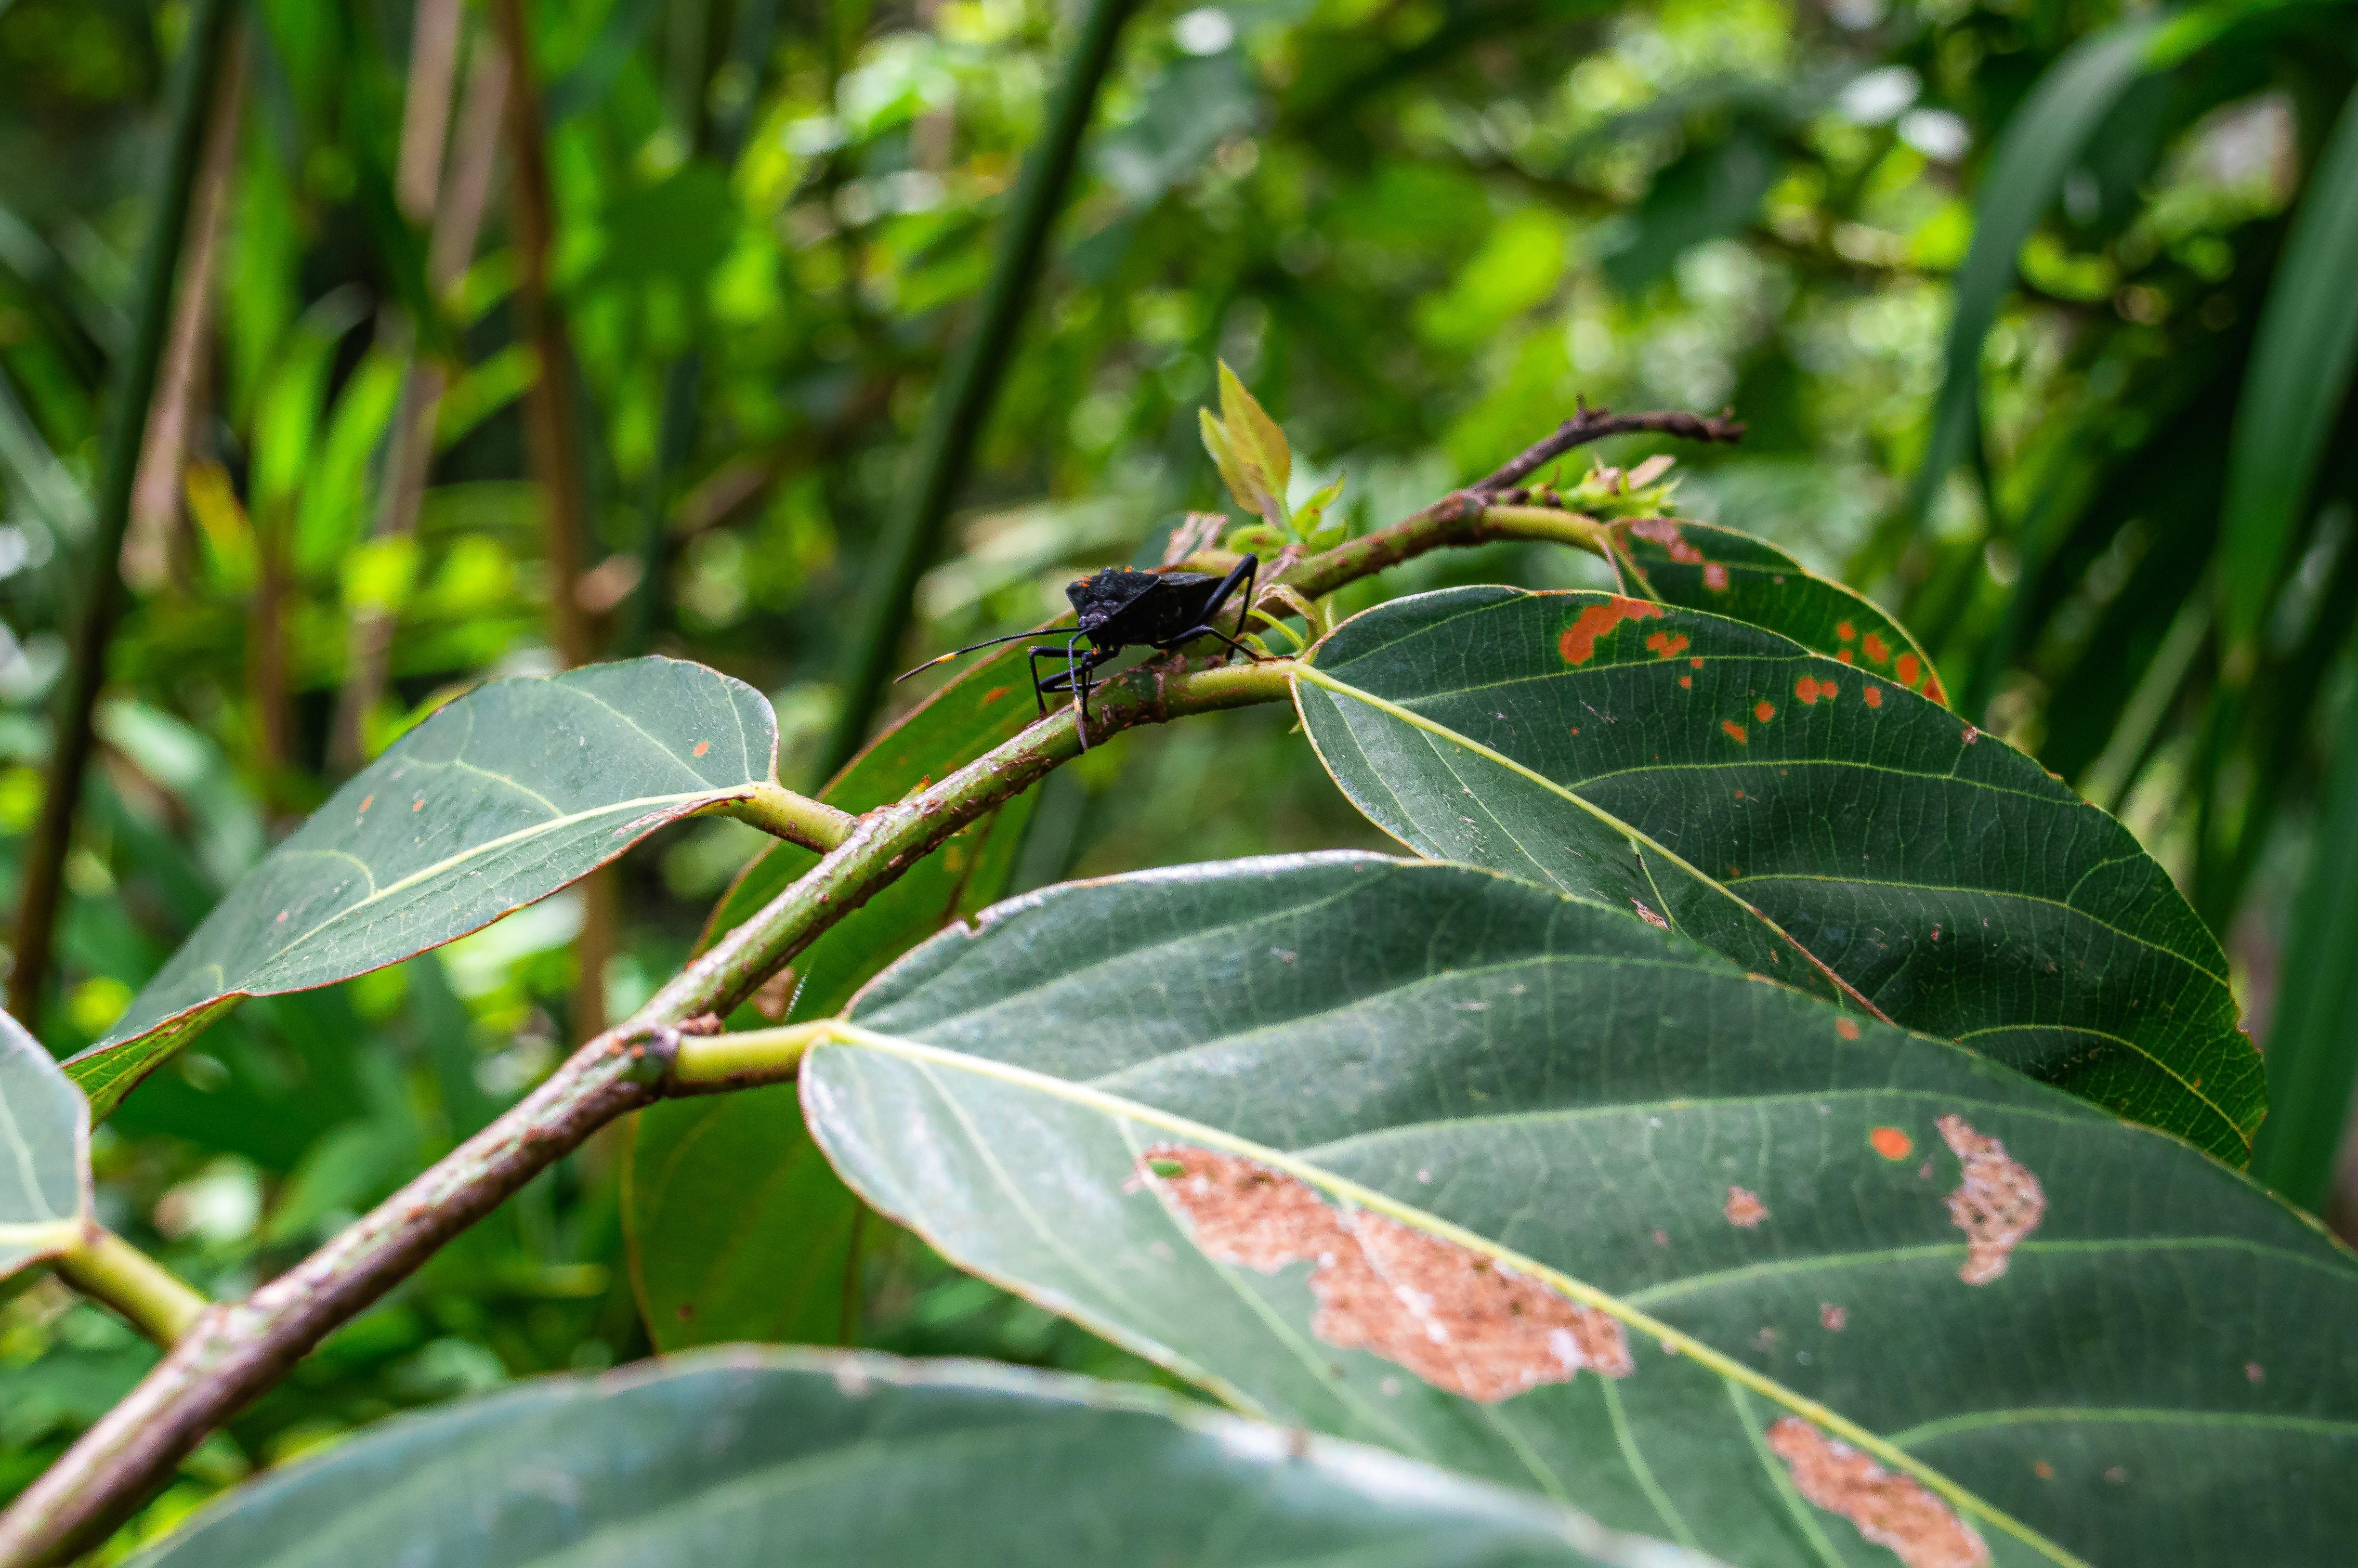 A closeup image of an insect sitting on a leaf in a tropical forest.